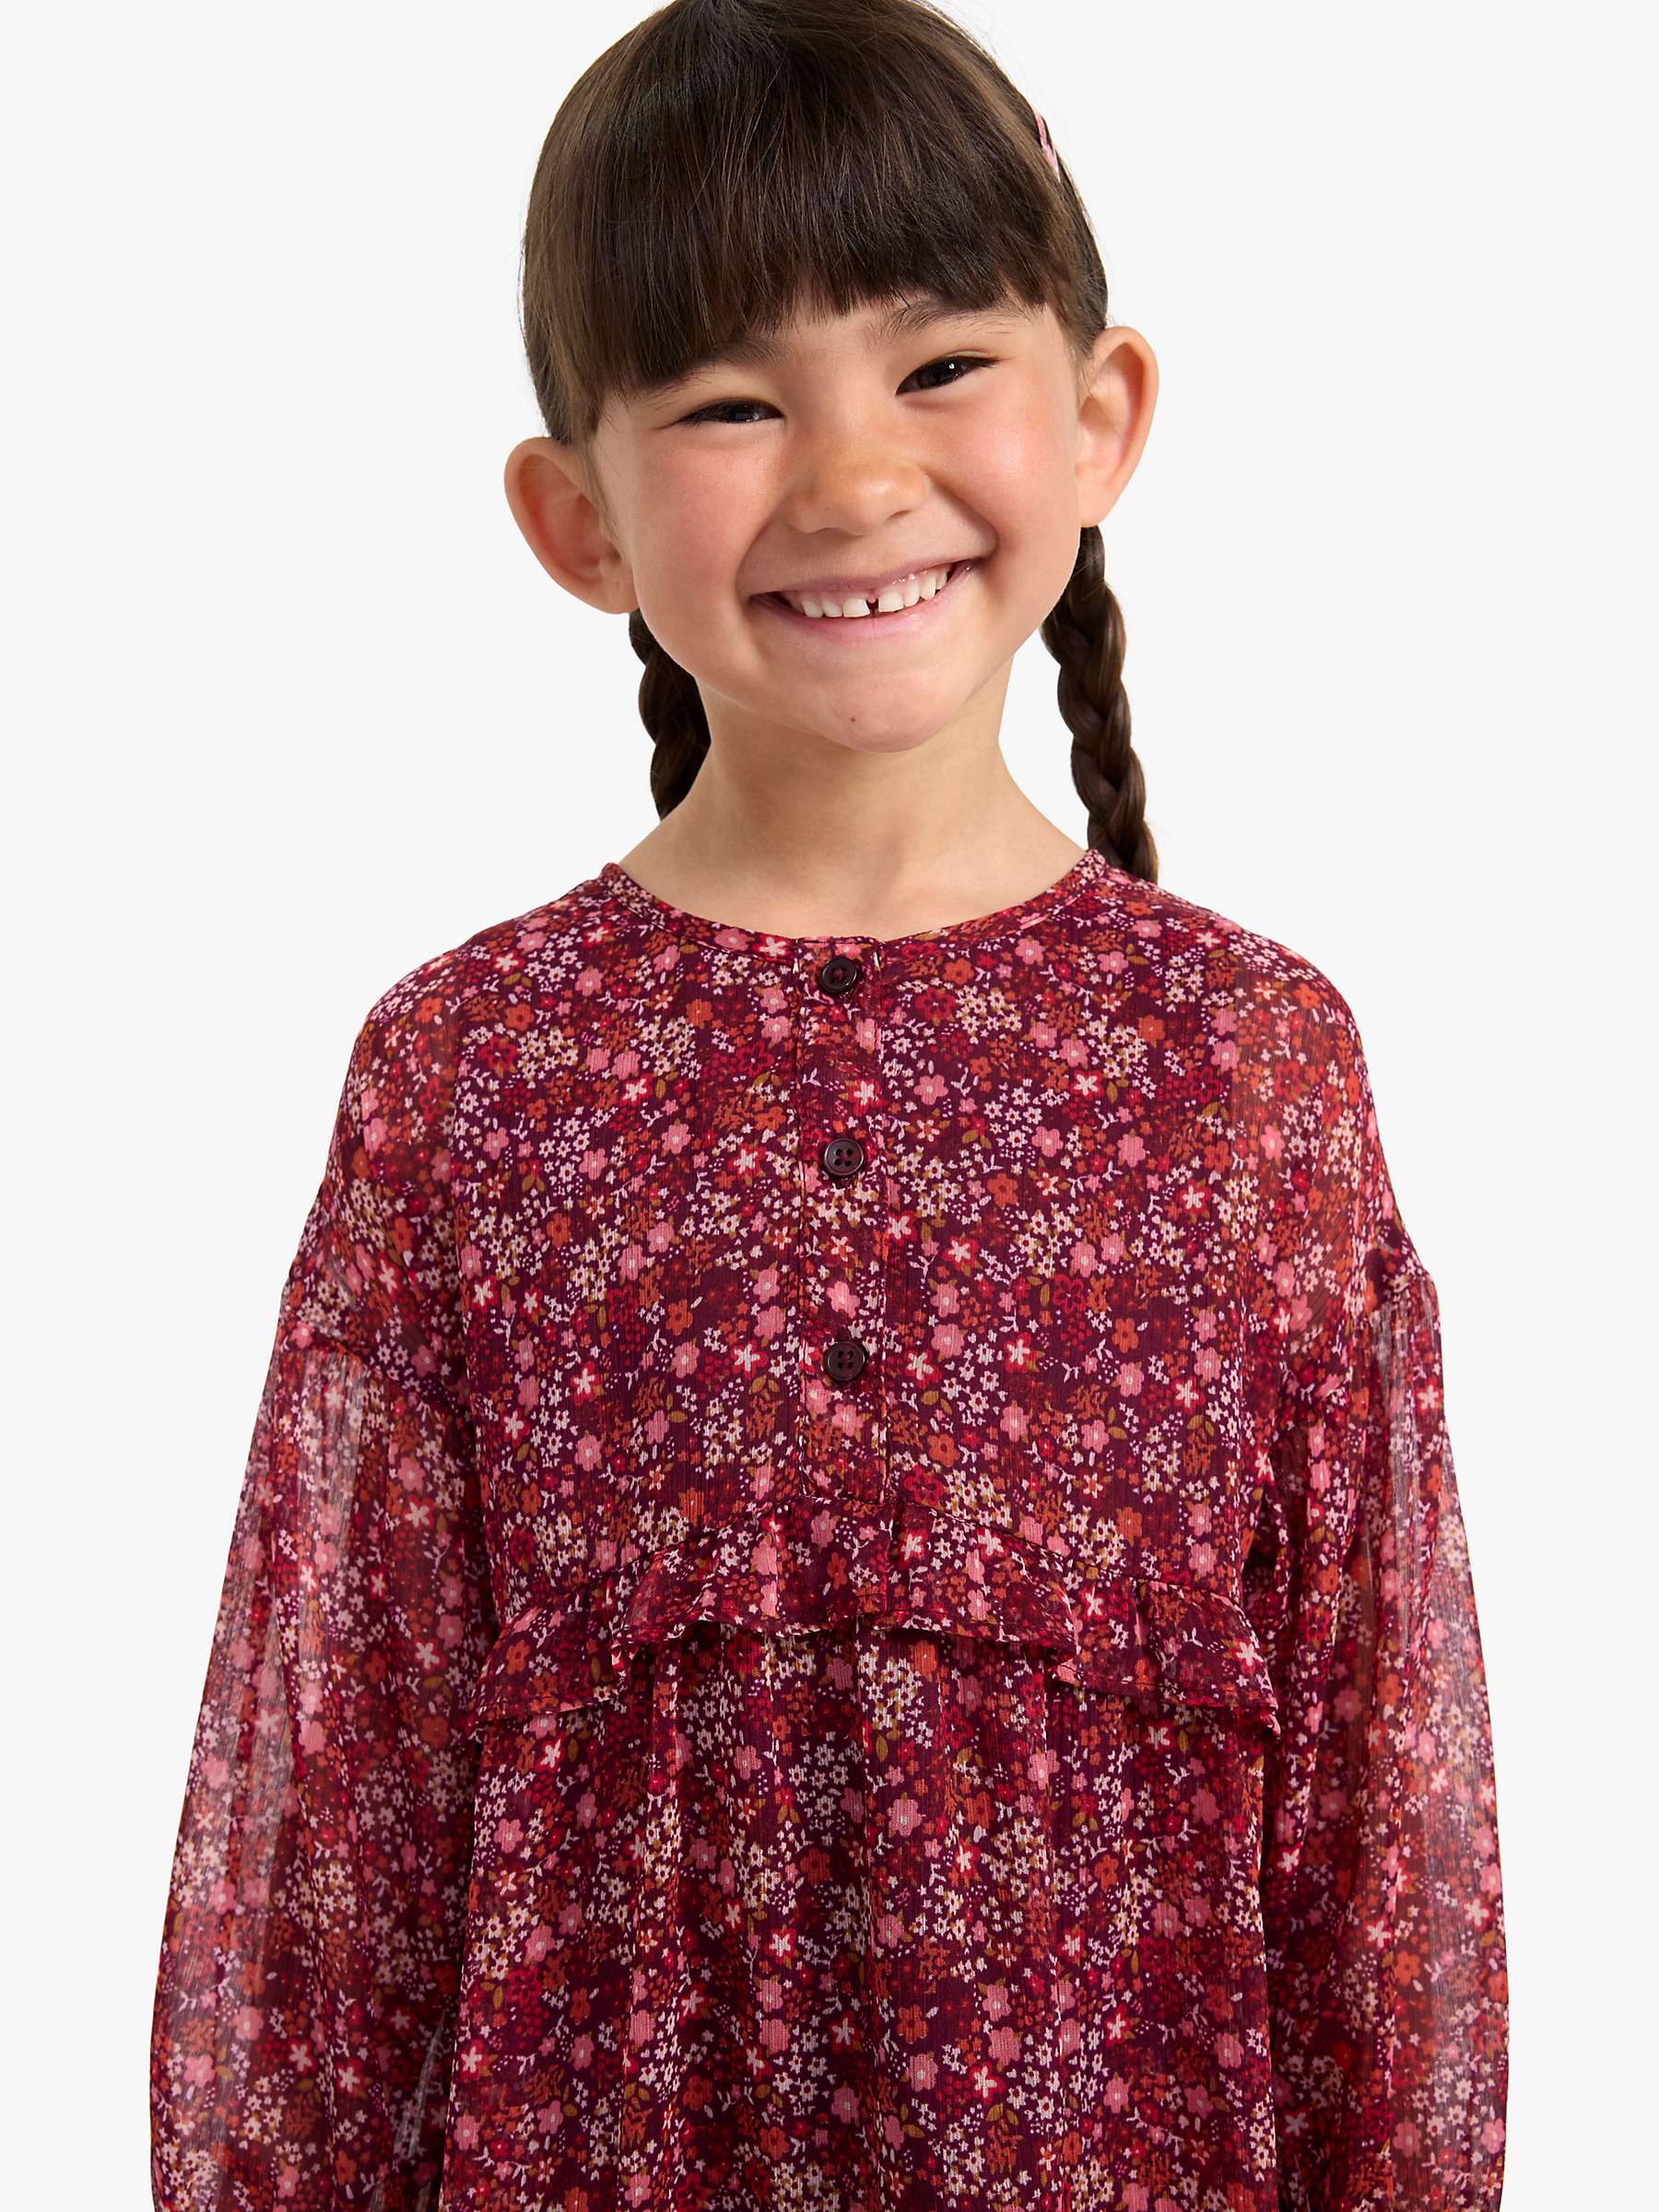 Buy Lindex Kids' Floral Chiffon Long Sleeve Tiered Dress, Lilac Online at johnlewis.com